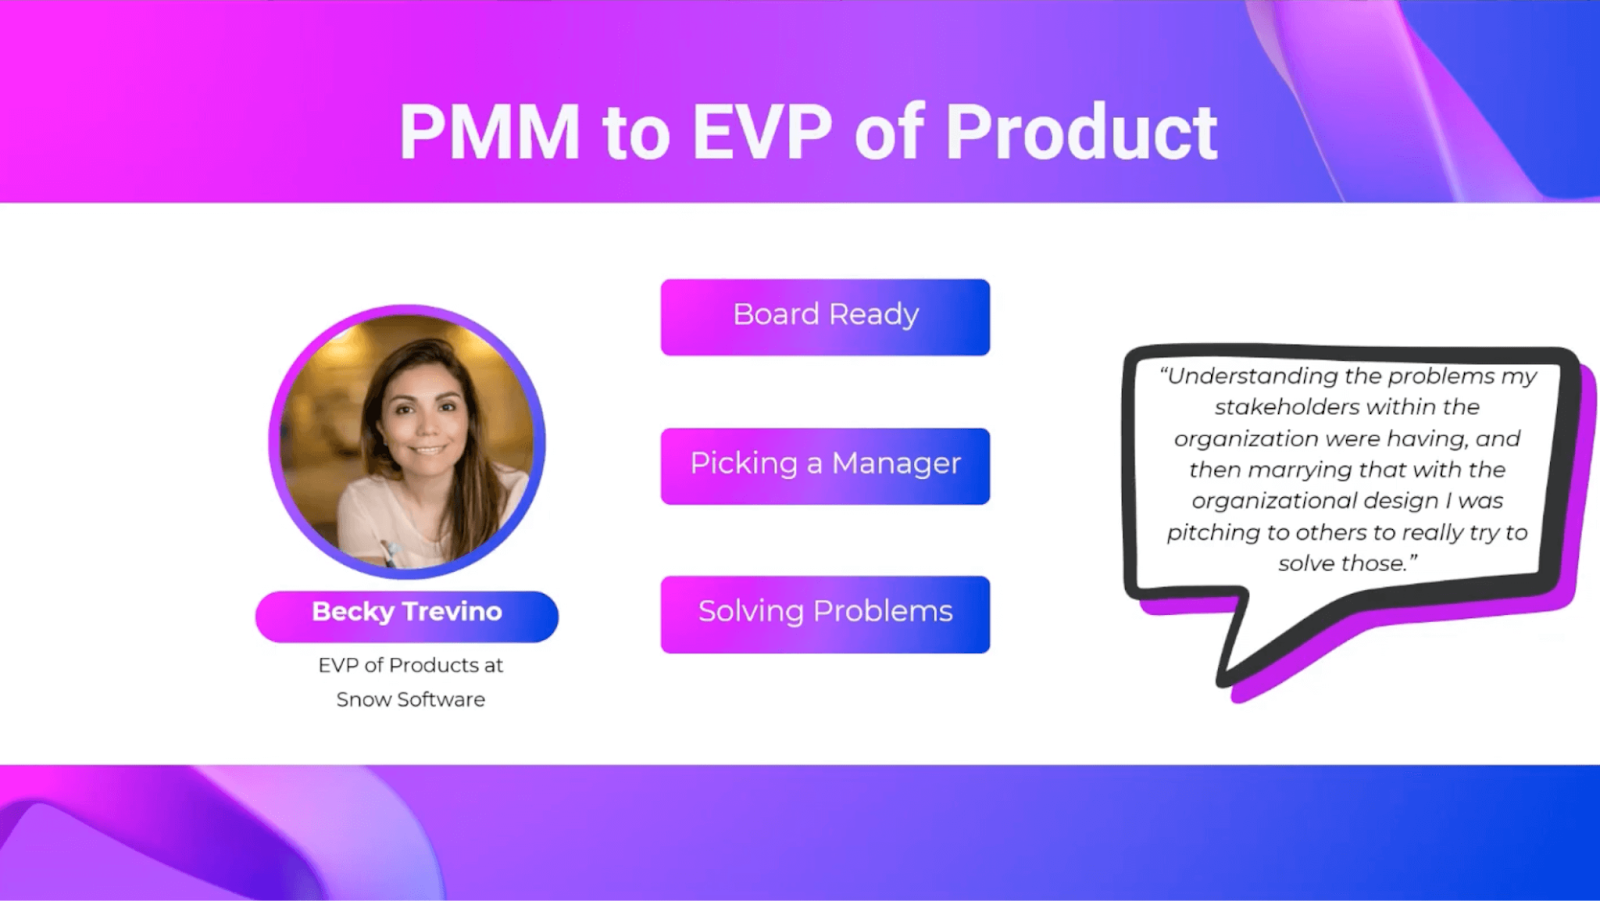 Becky Trevino, PMM to EVP of Product. Advice: be board ready, pick your manager wisely, solve problems.